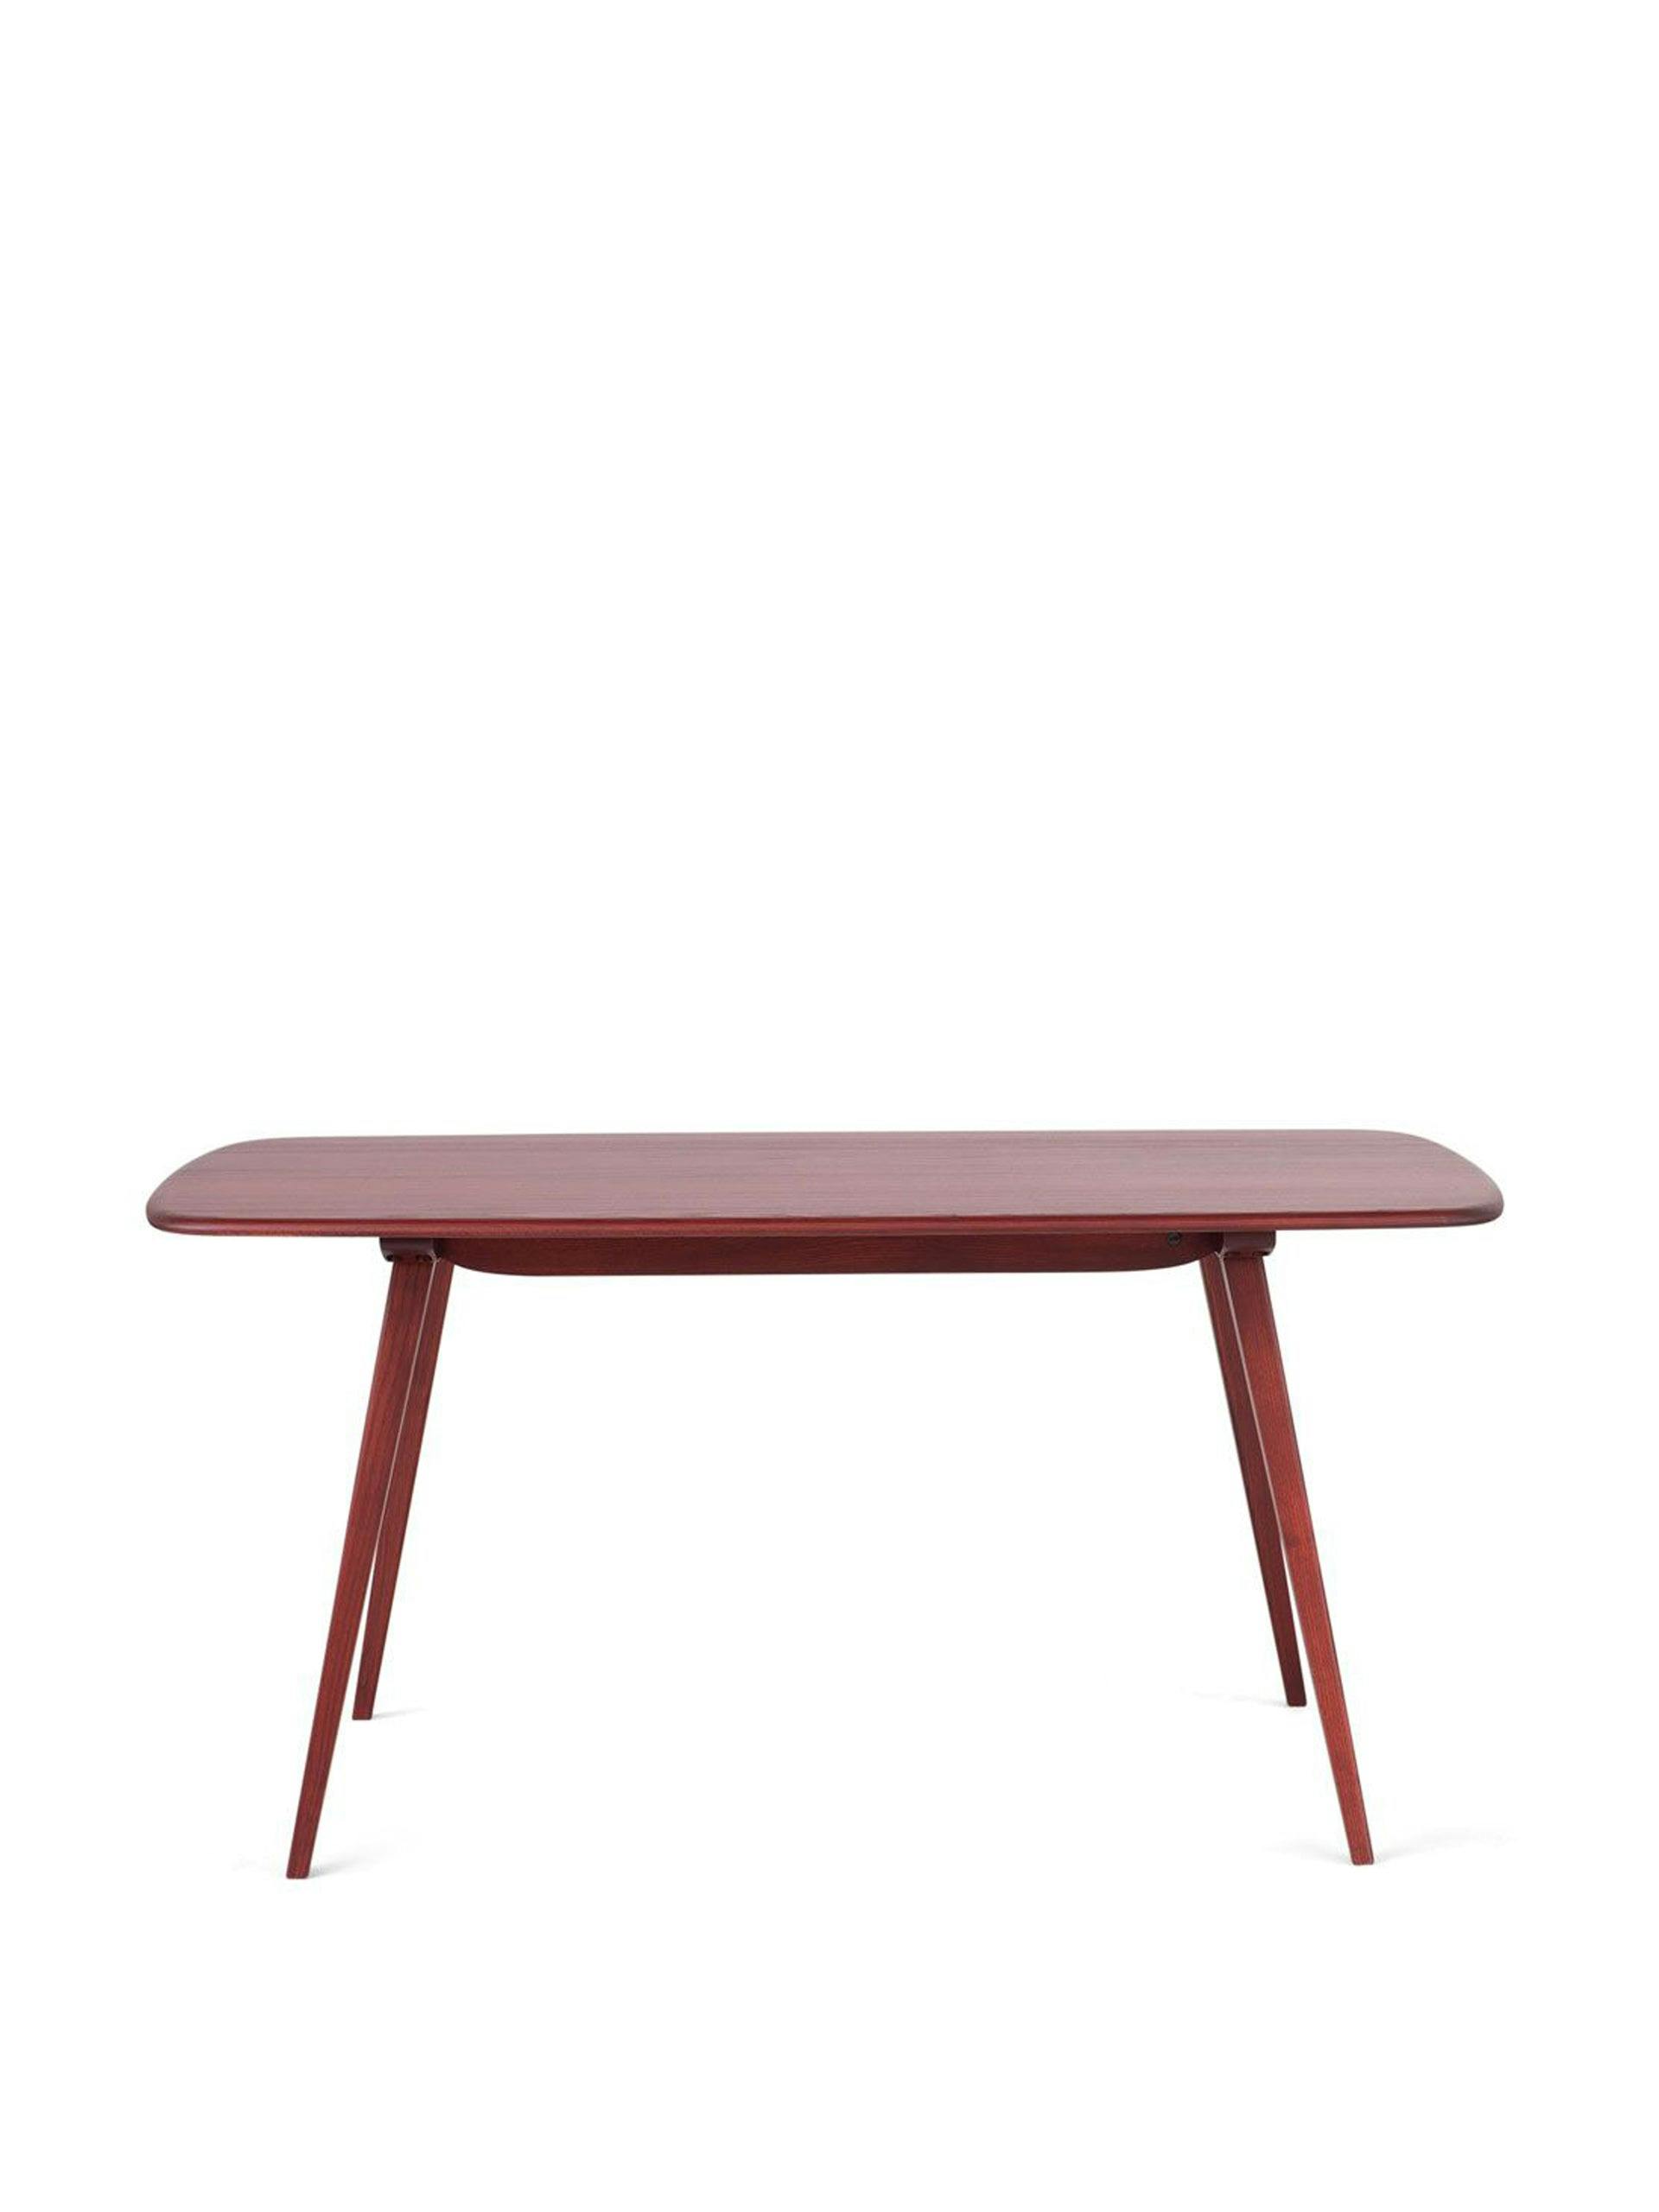 Ash plank table in vintage red